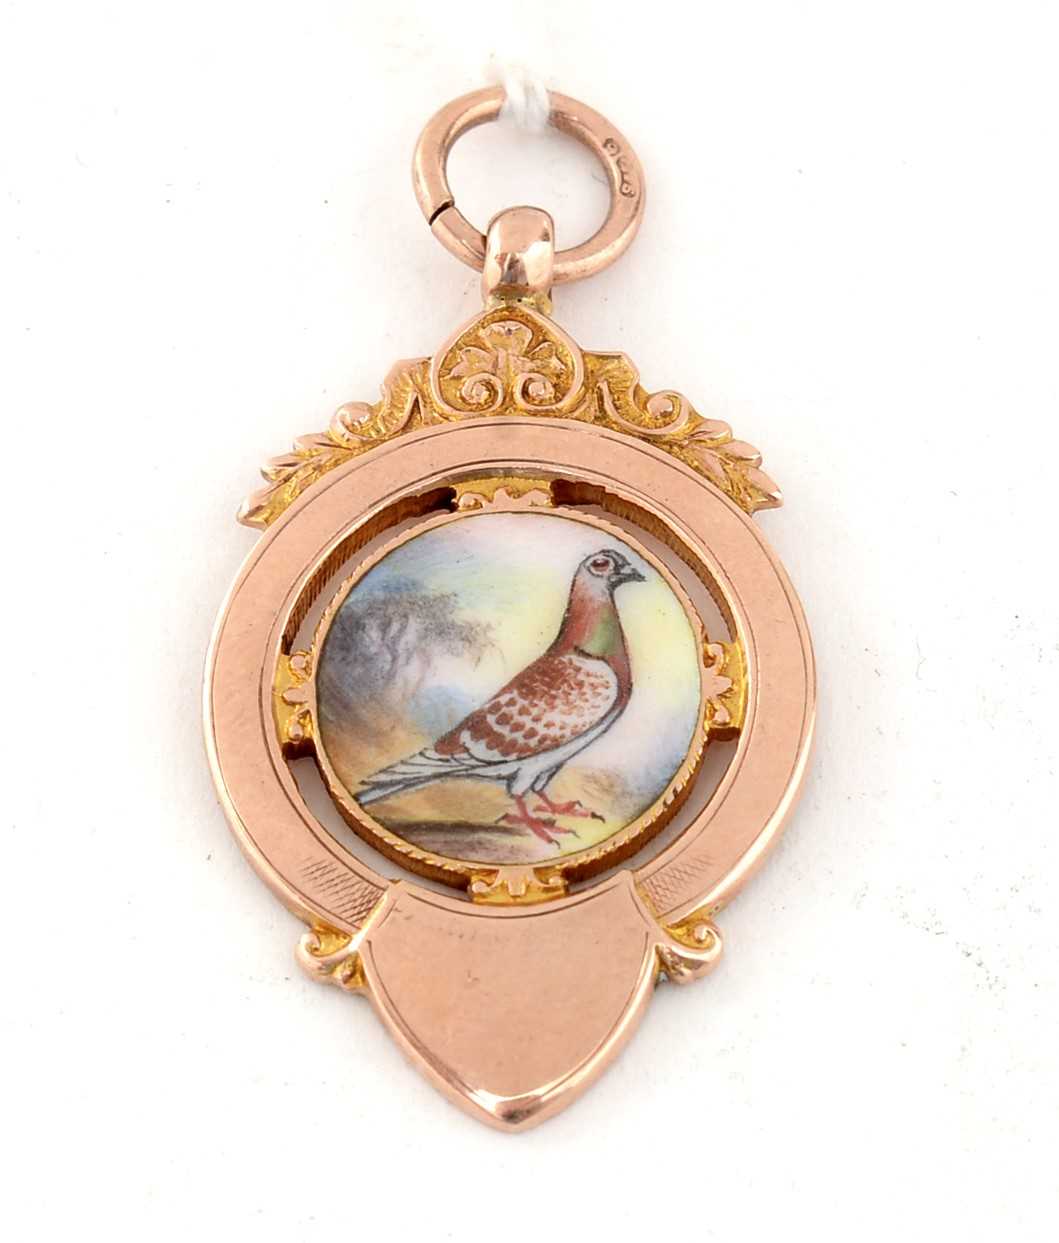 Lot 249 - A 9ct yellow gold and enamel pigeon racing fob medal